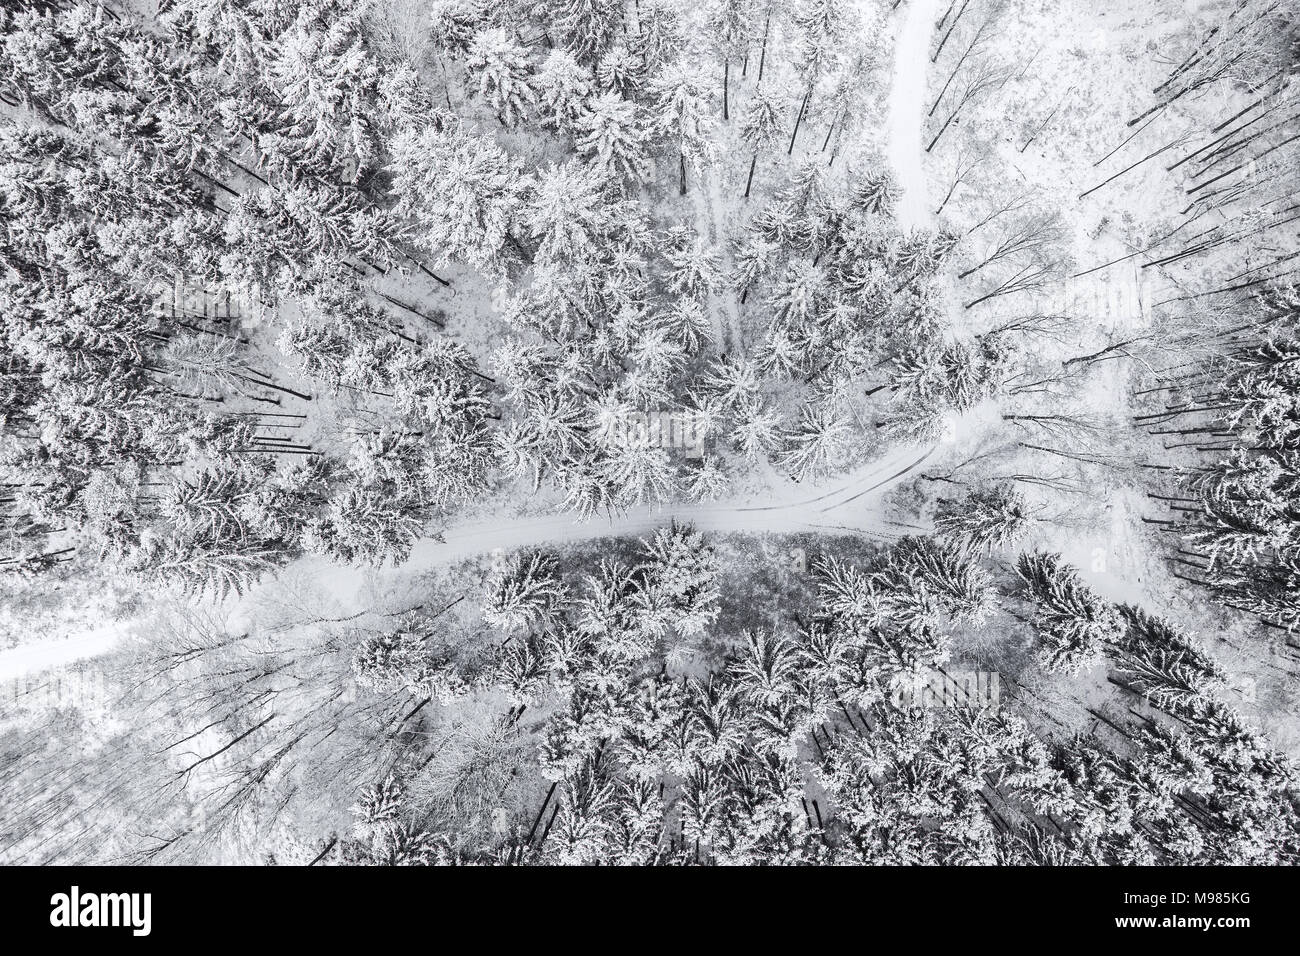 Germany, Bavaria, Conifers in winter from above Stock Photo